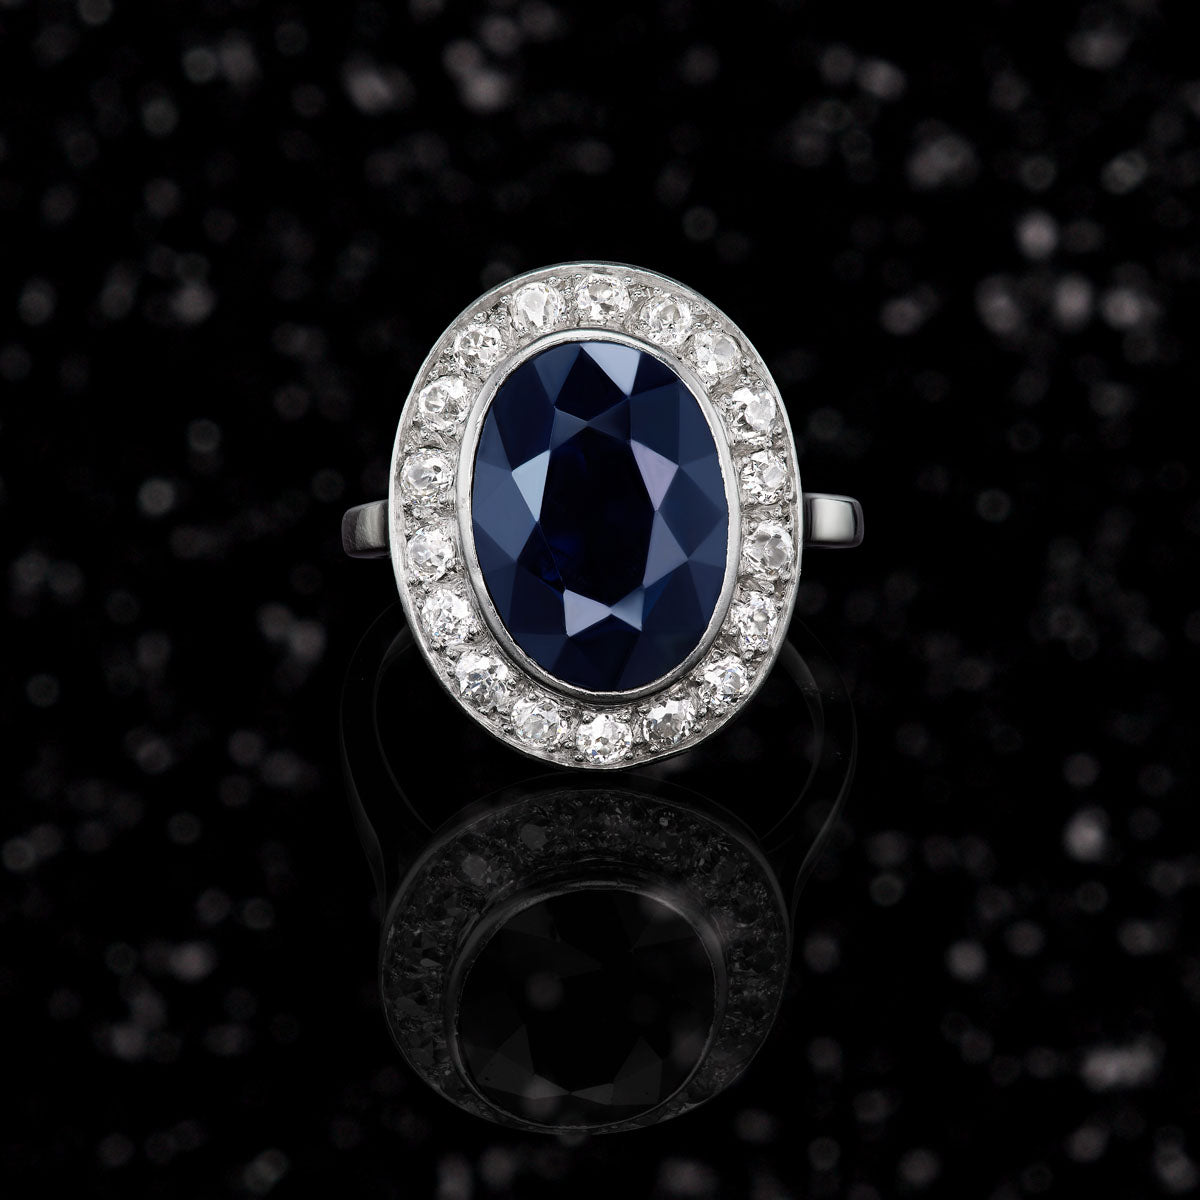 THE SAPPHIRE LOVE SONG RING